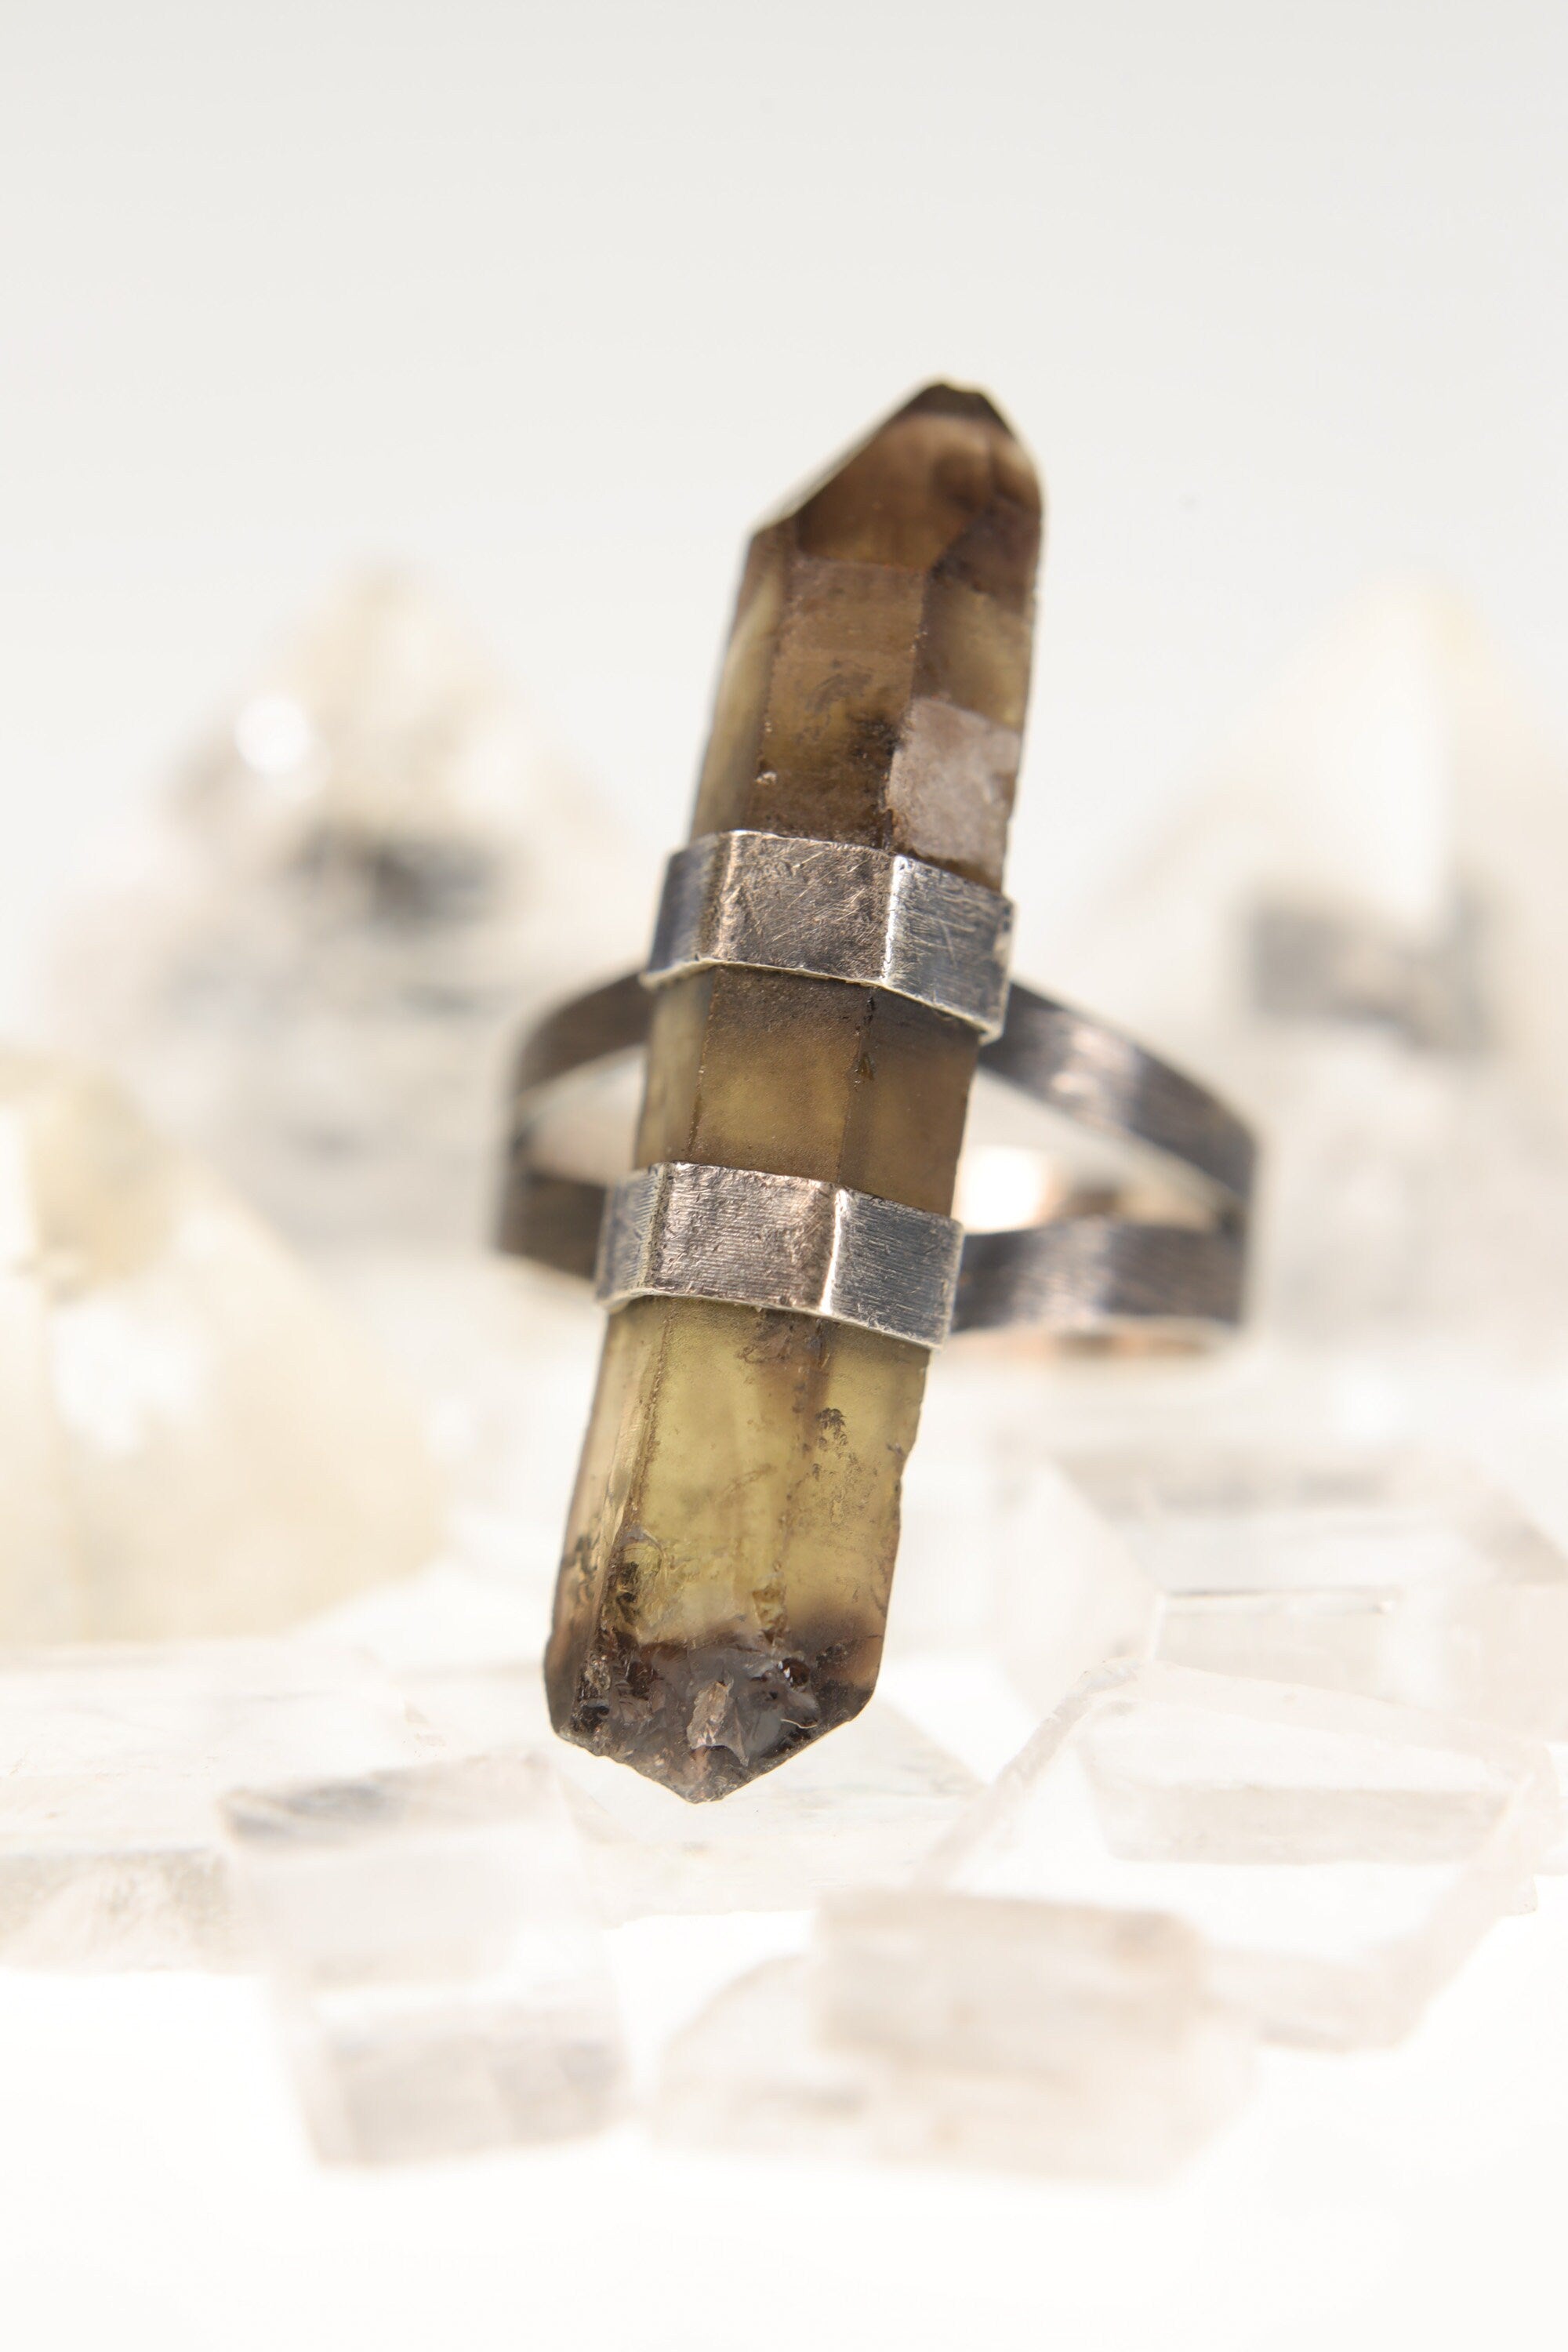 Torrington Radiance: Textured & Oxidised Sterling Silver Ring with Natural Australian Smoky Citrine Quartz - Size 8 3/4 - NO/02